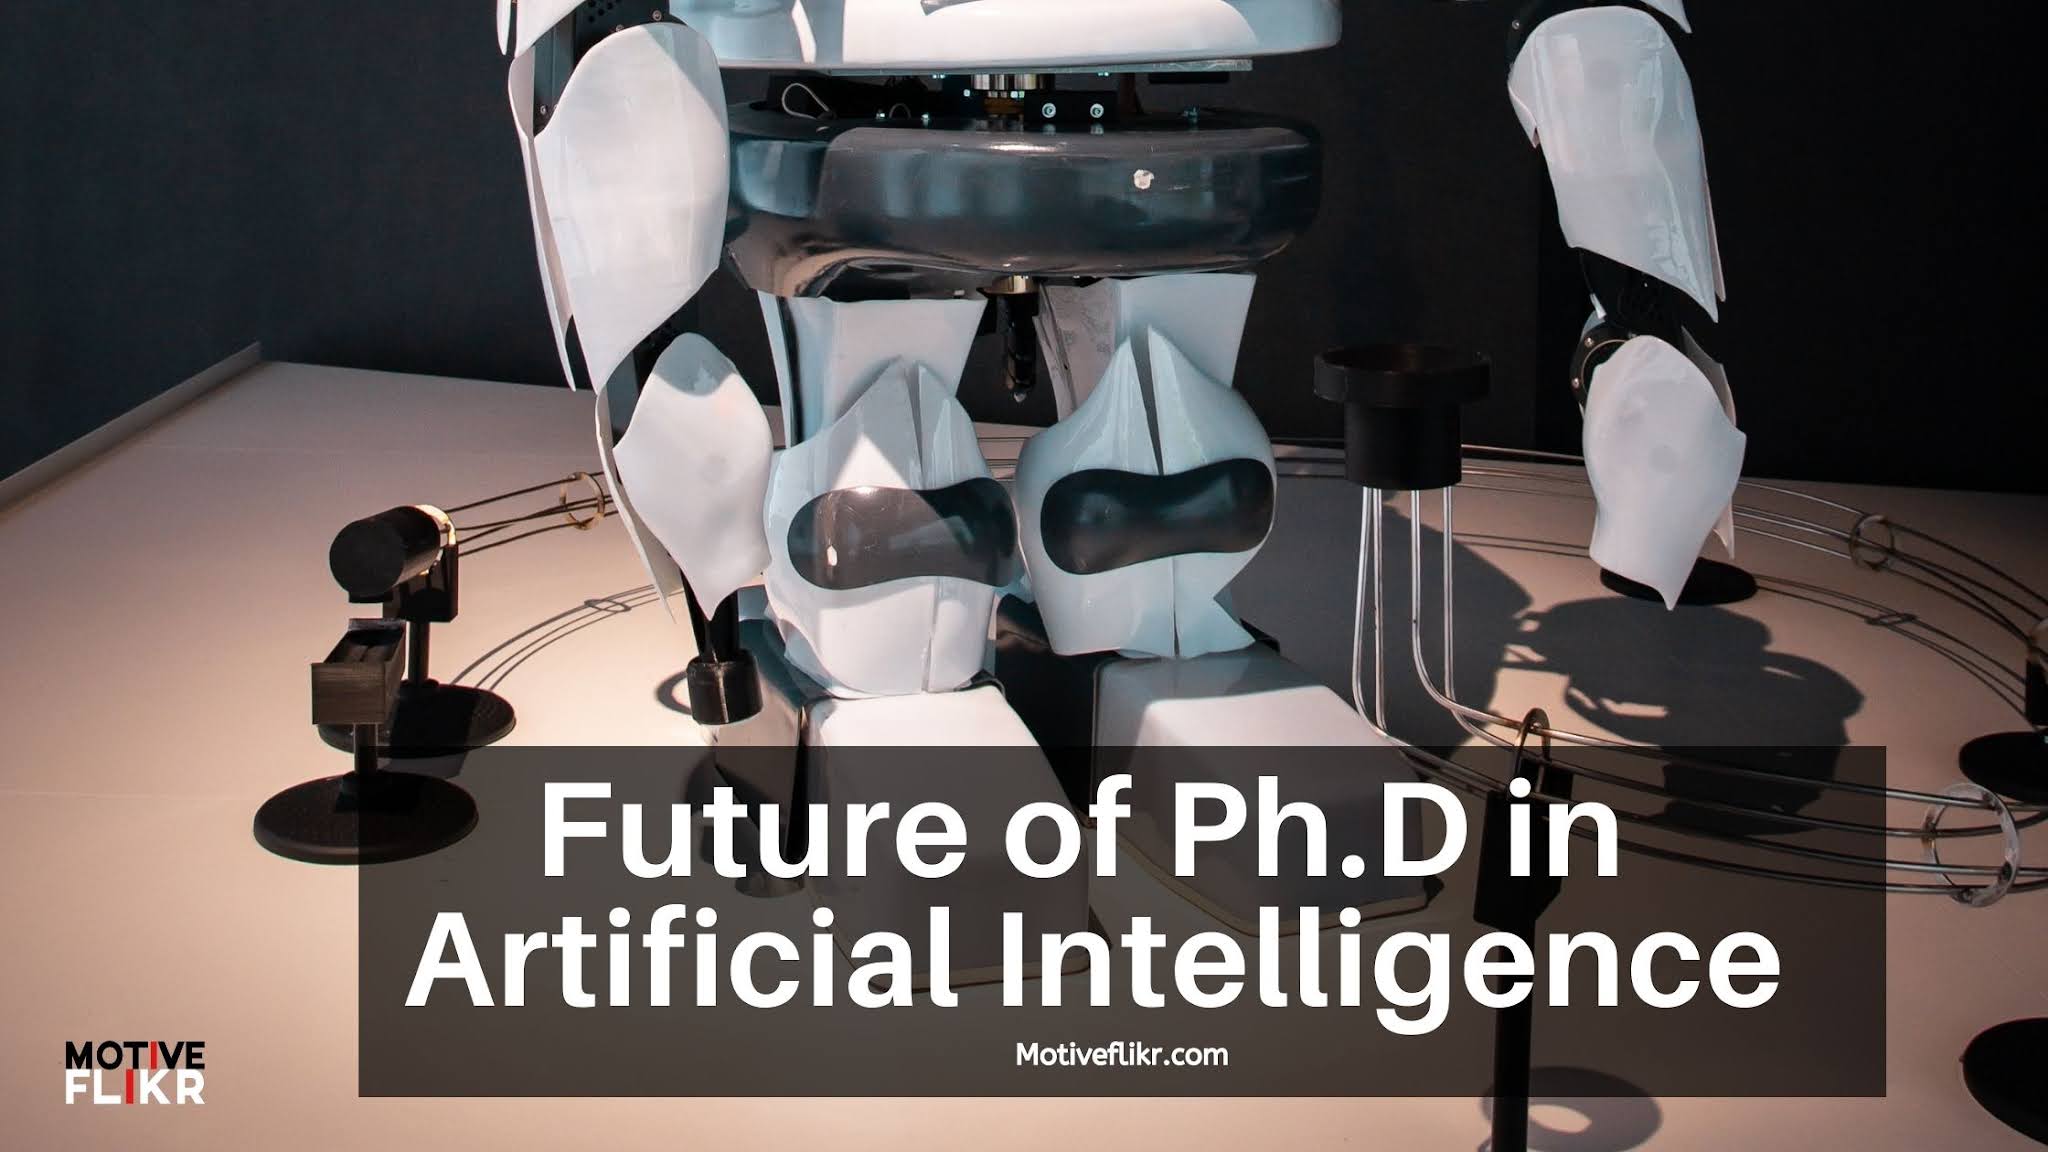 Future of Ph.D in Artificial Intelligence